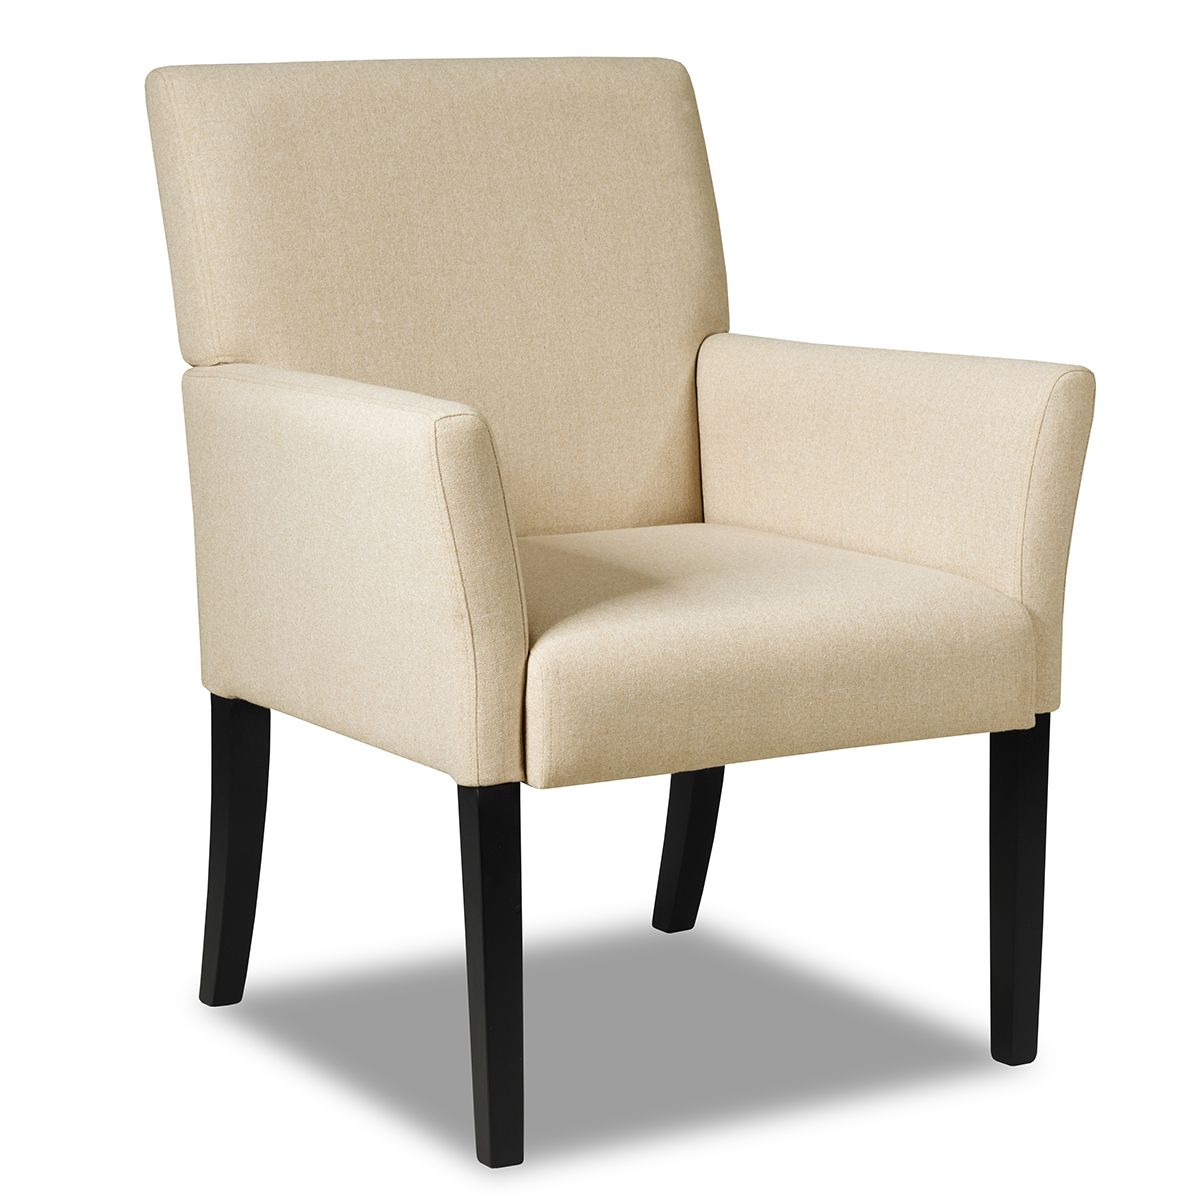 Executive Guest Chair for Office or Dining Room - Beige